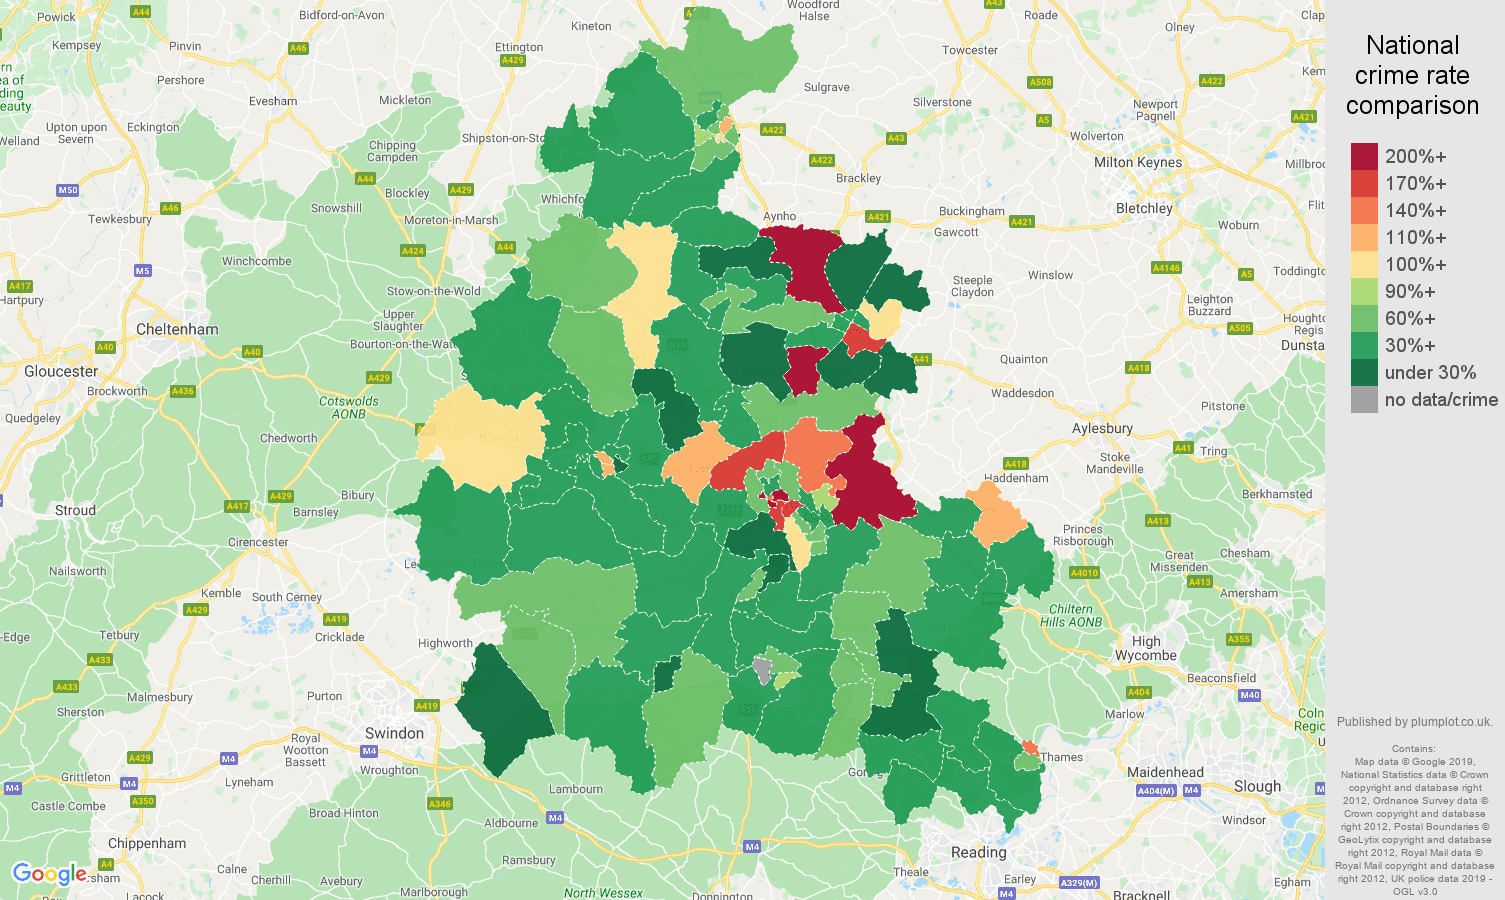 Oxfordshire other theft crime rate comparison map